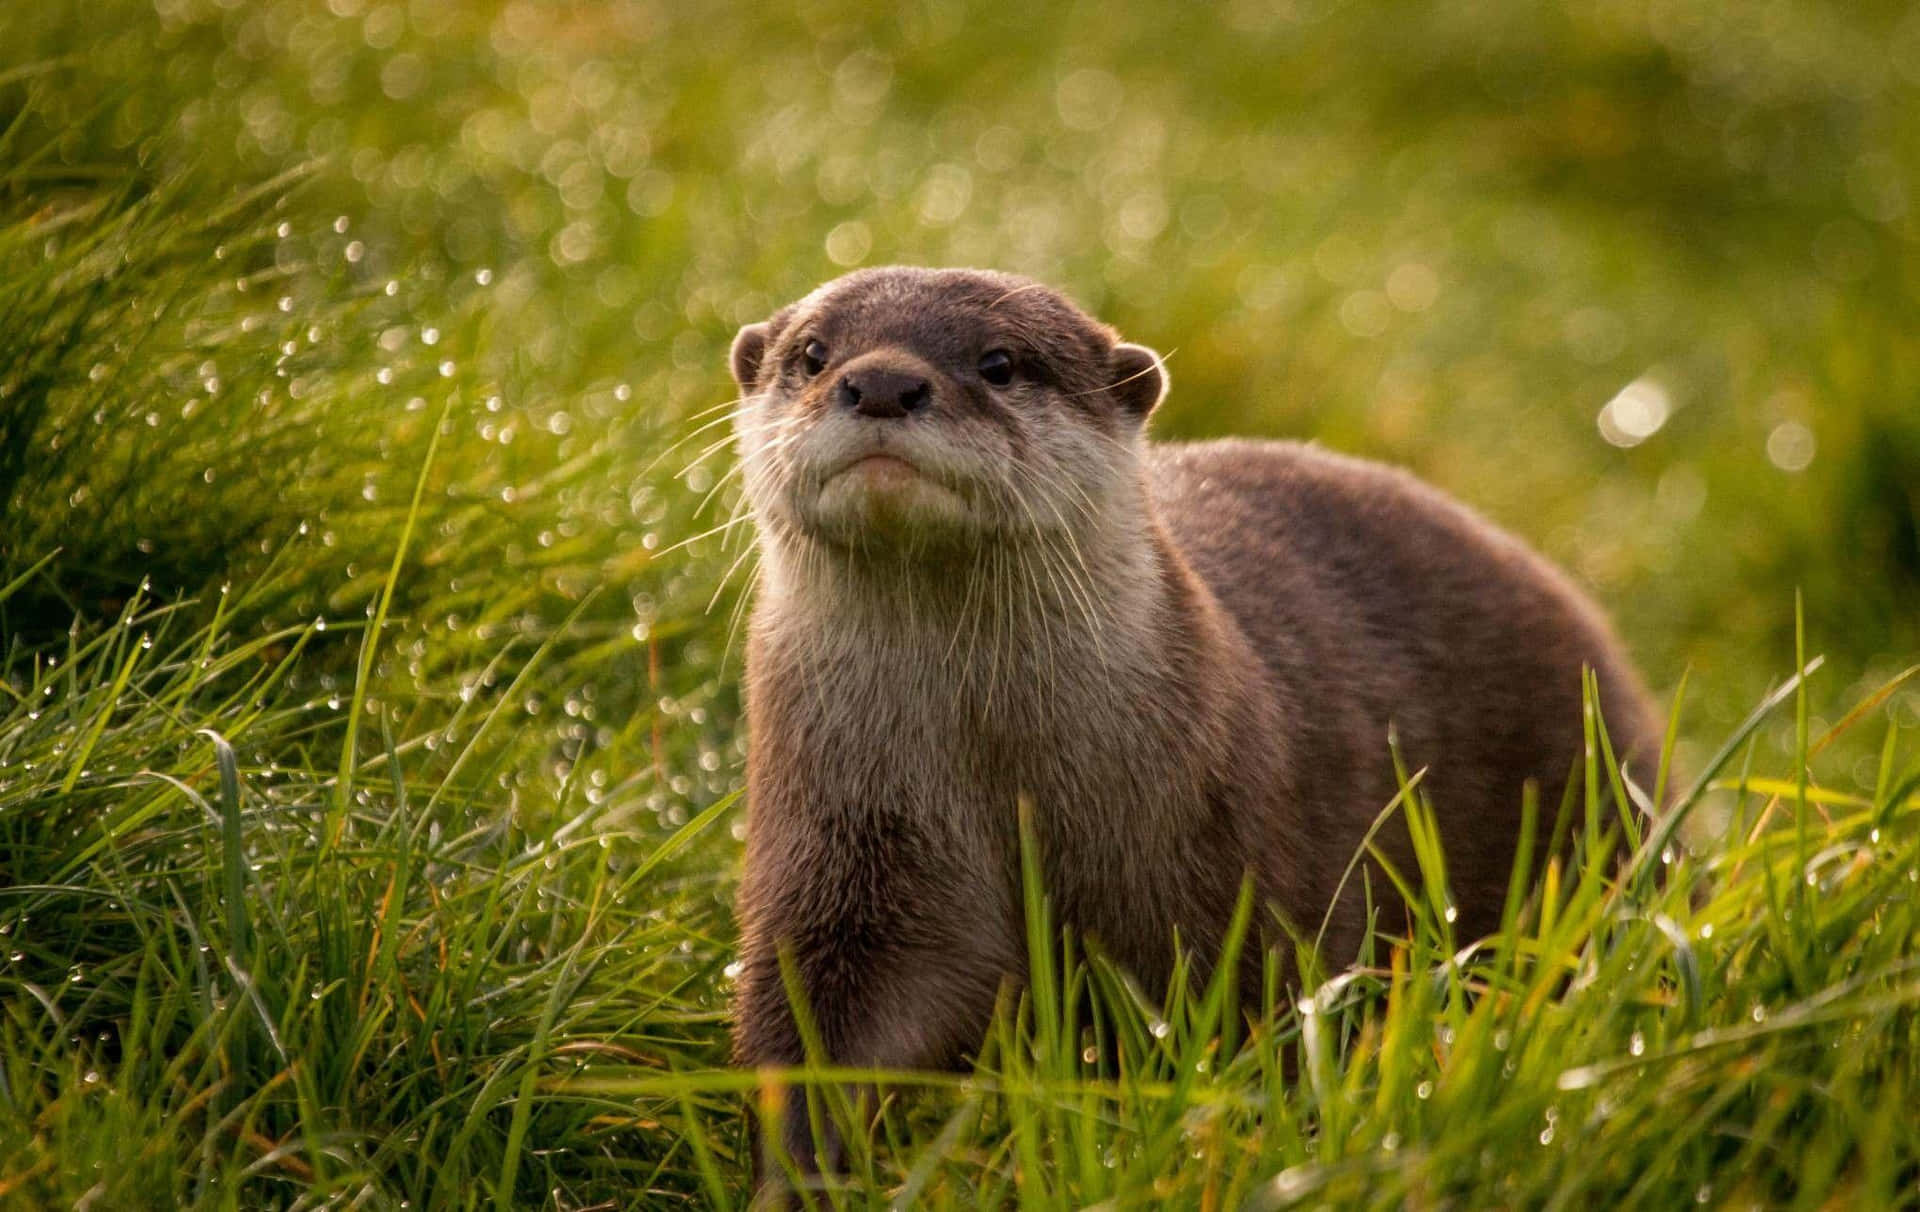 Cute Otter On The Grass Field Picture